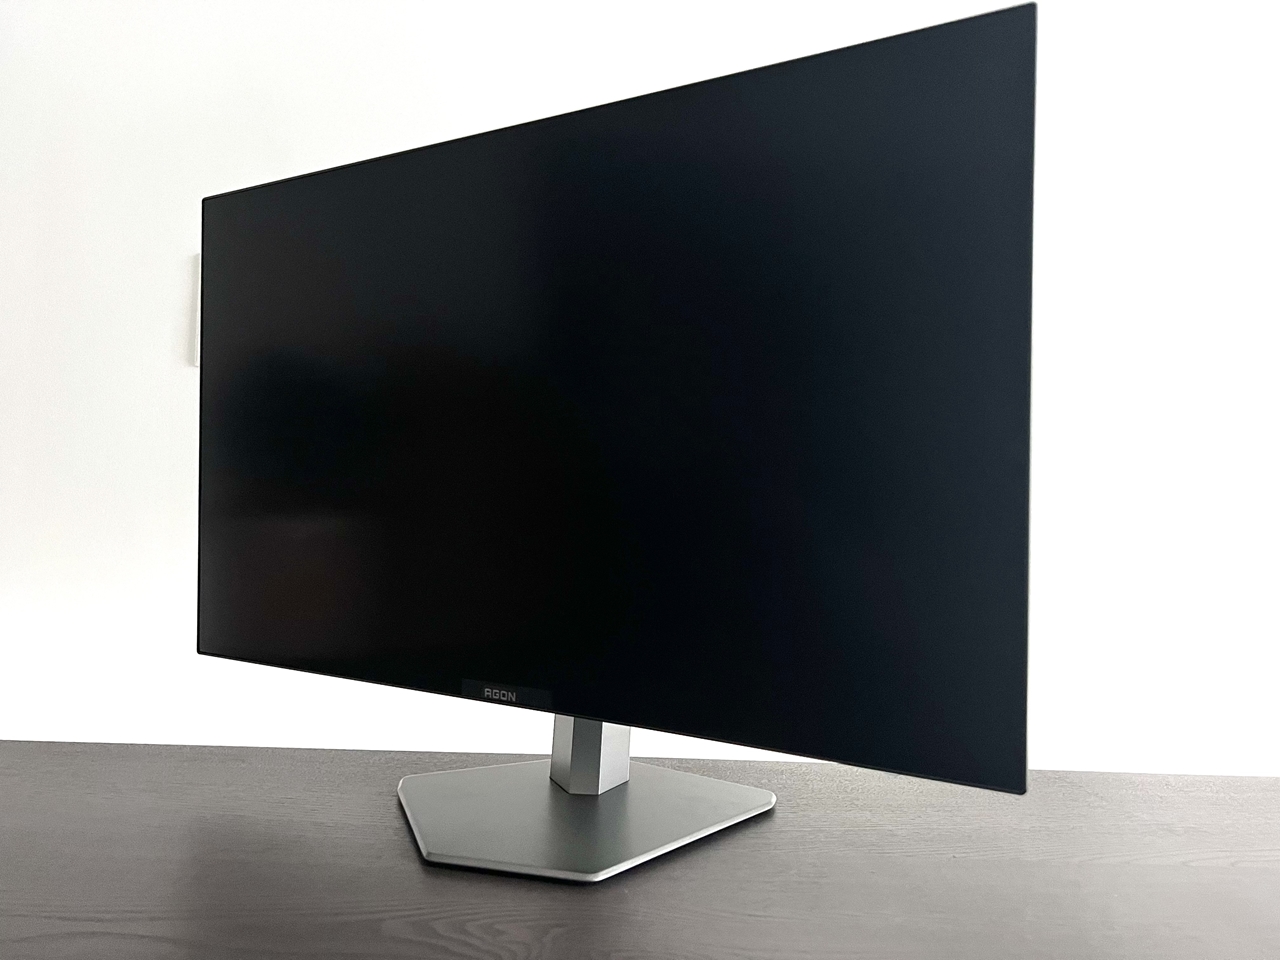 AOC reveals 26.5-inch AGON OLED gaming monitor with 240Hz refresh